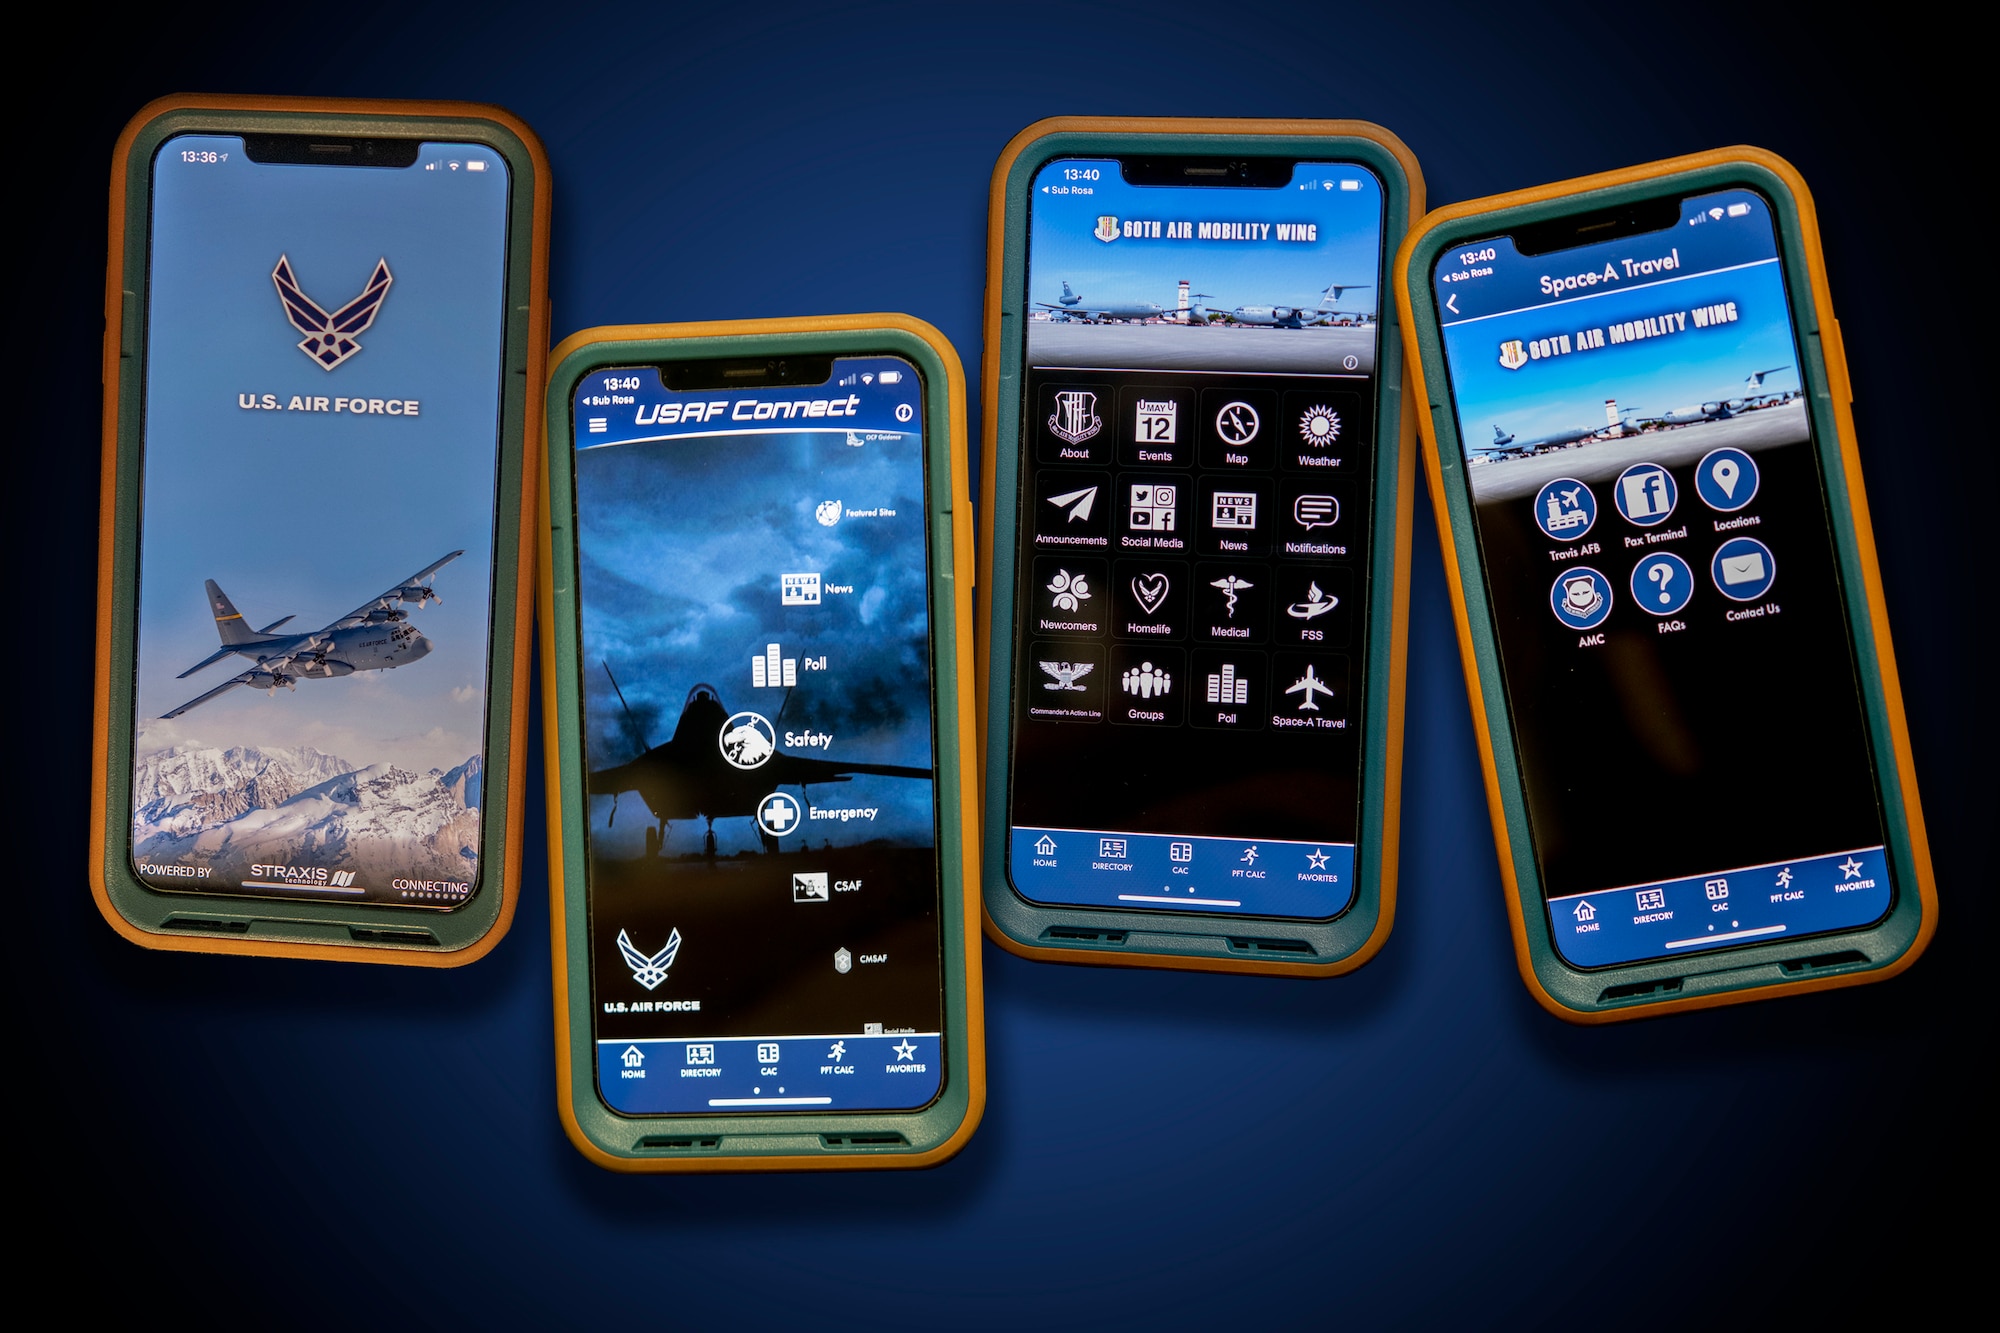 The 60th Air Mobility Wing is excited to announce the launch of its sub-app on the USAF Connect mobile application.